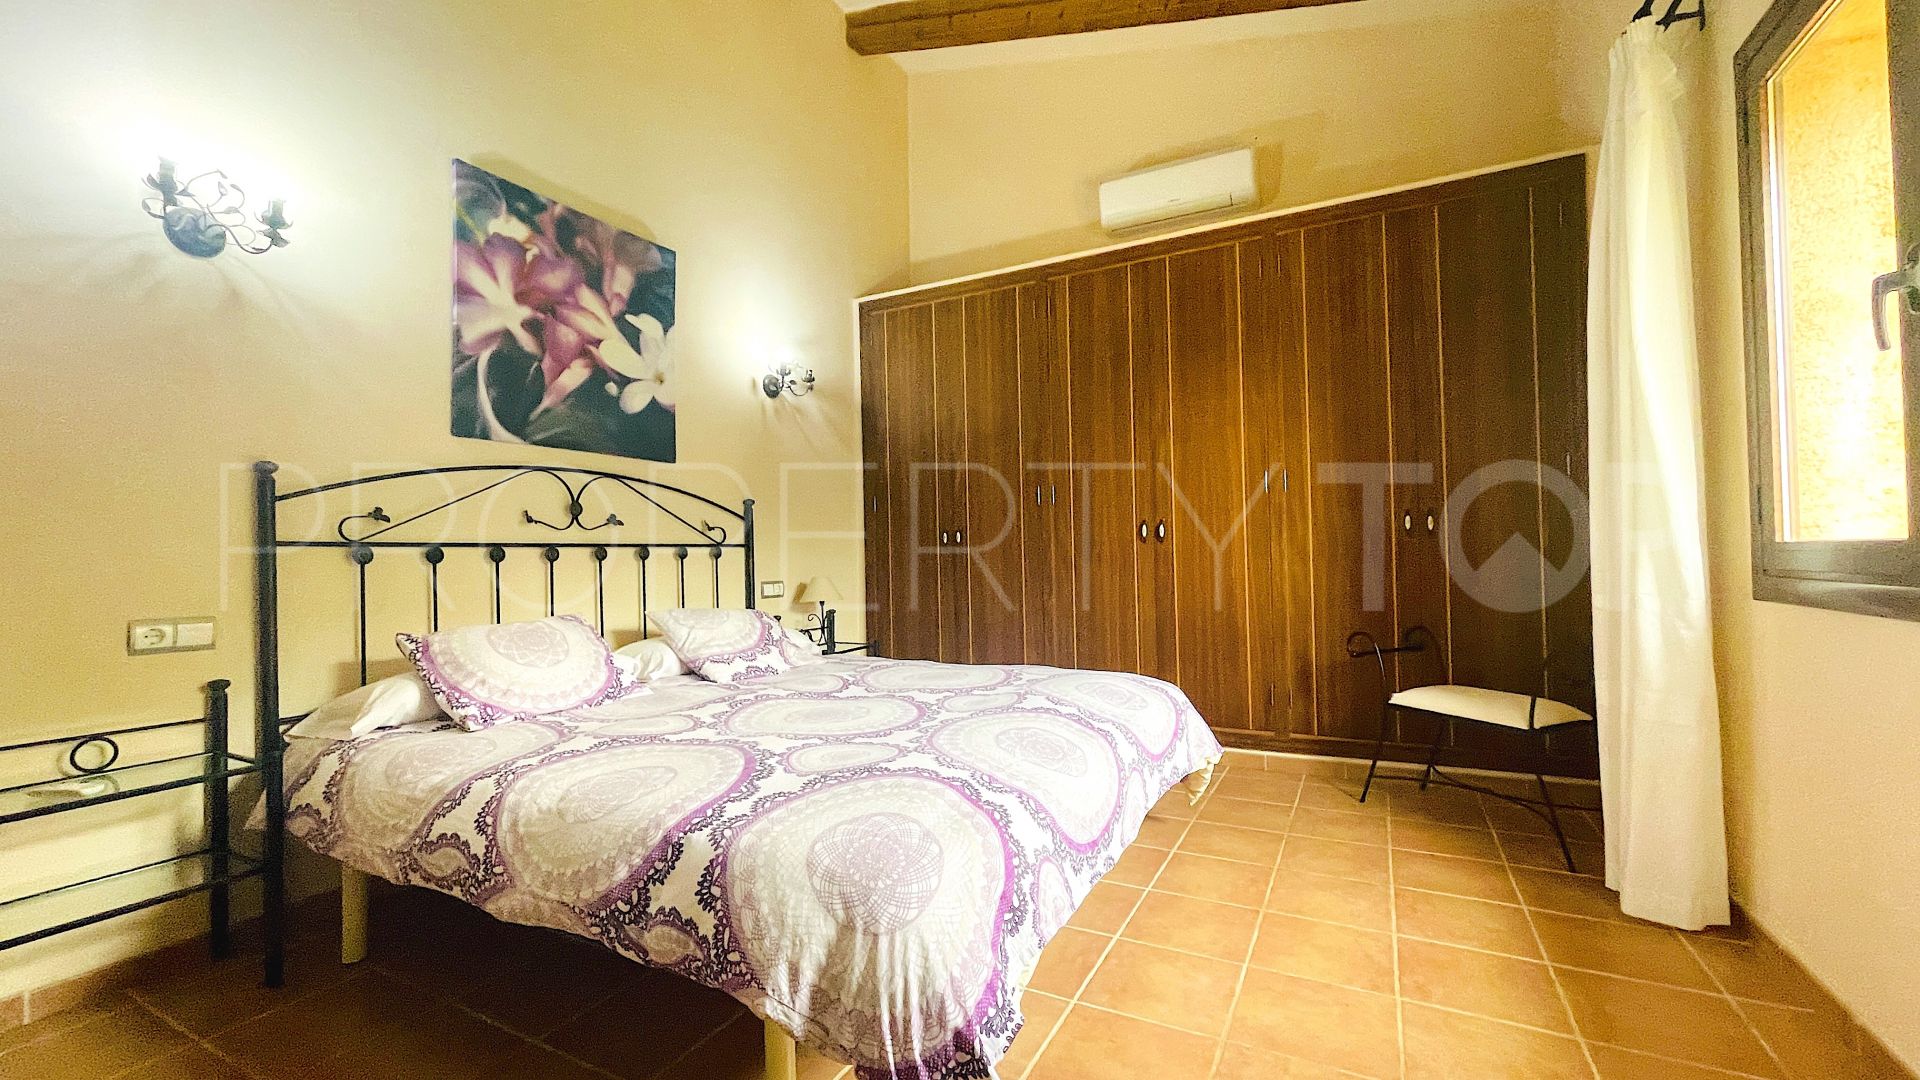 5 bedrooms house in Santanyi for sale